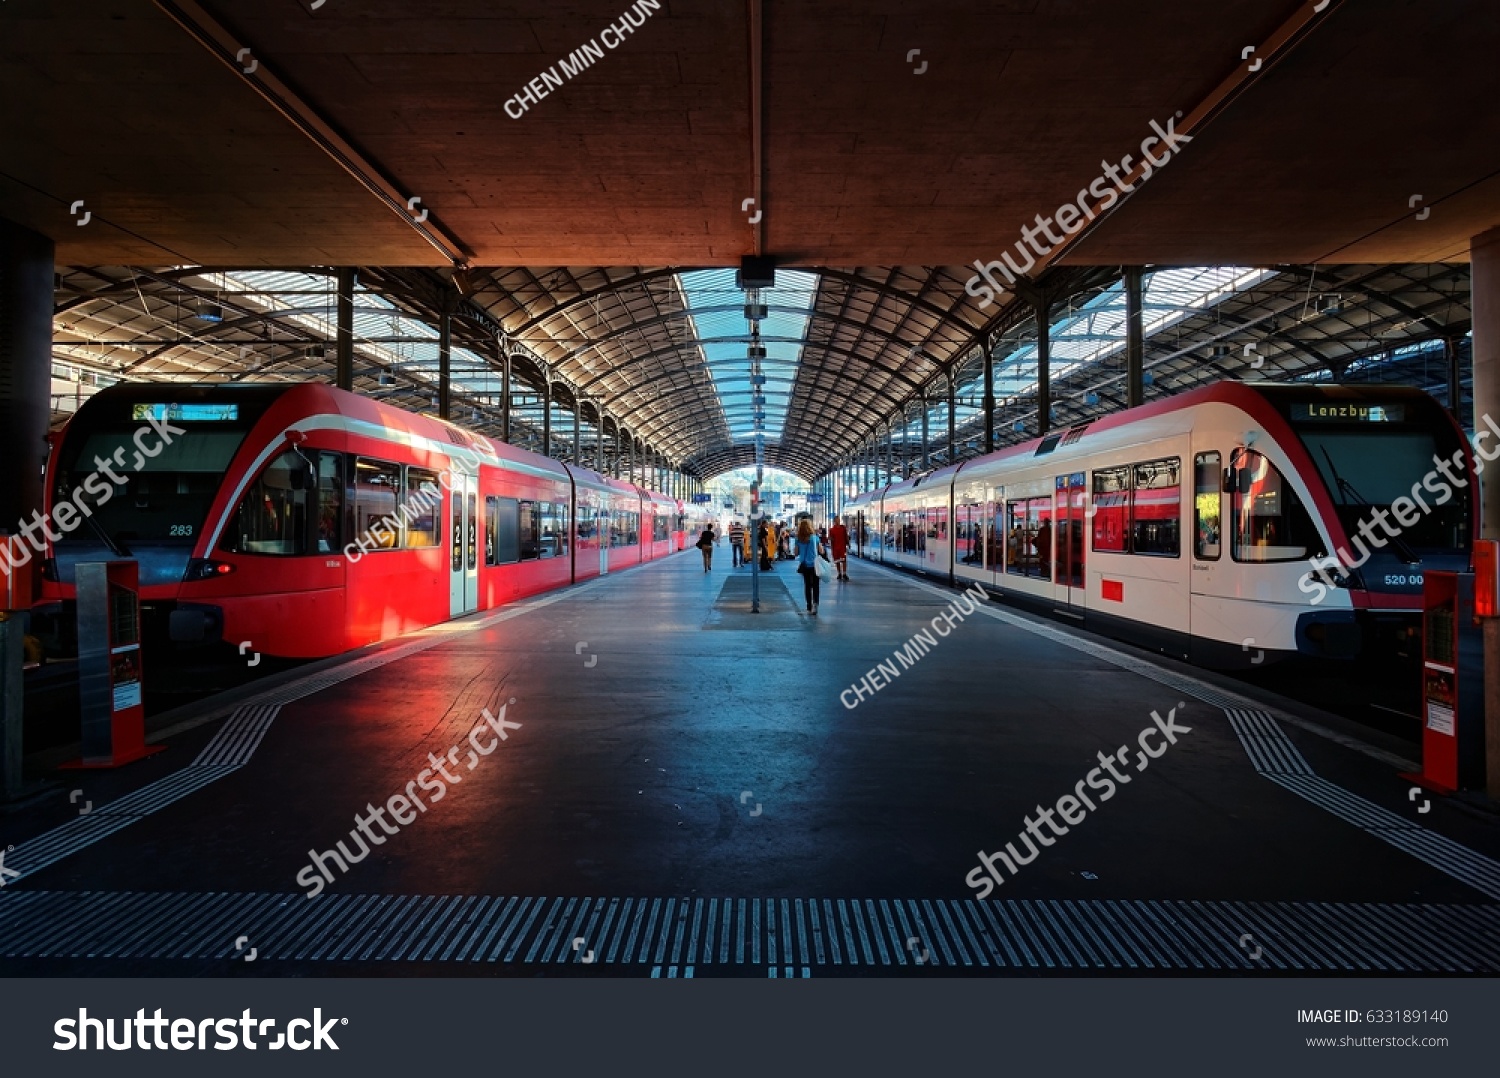 Perspective view of a platform in Lucerne Central Railway Station with sunlight cast on trains parking by the platform & passengers hurrying for boarding~A beautiful corner in Lucern Railroad Terminal #633189140